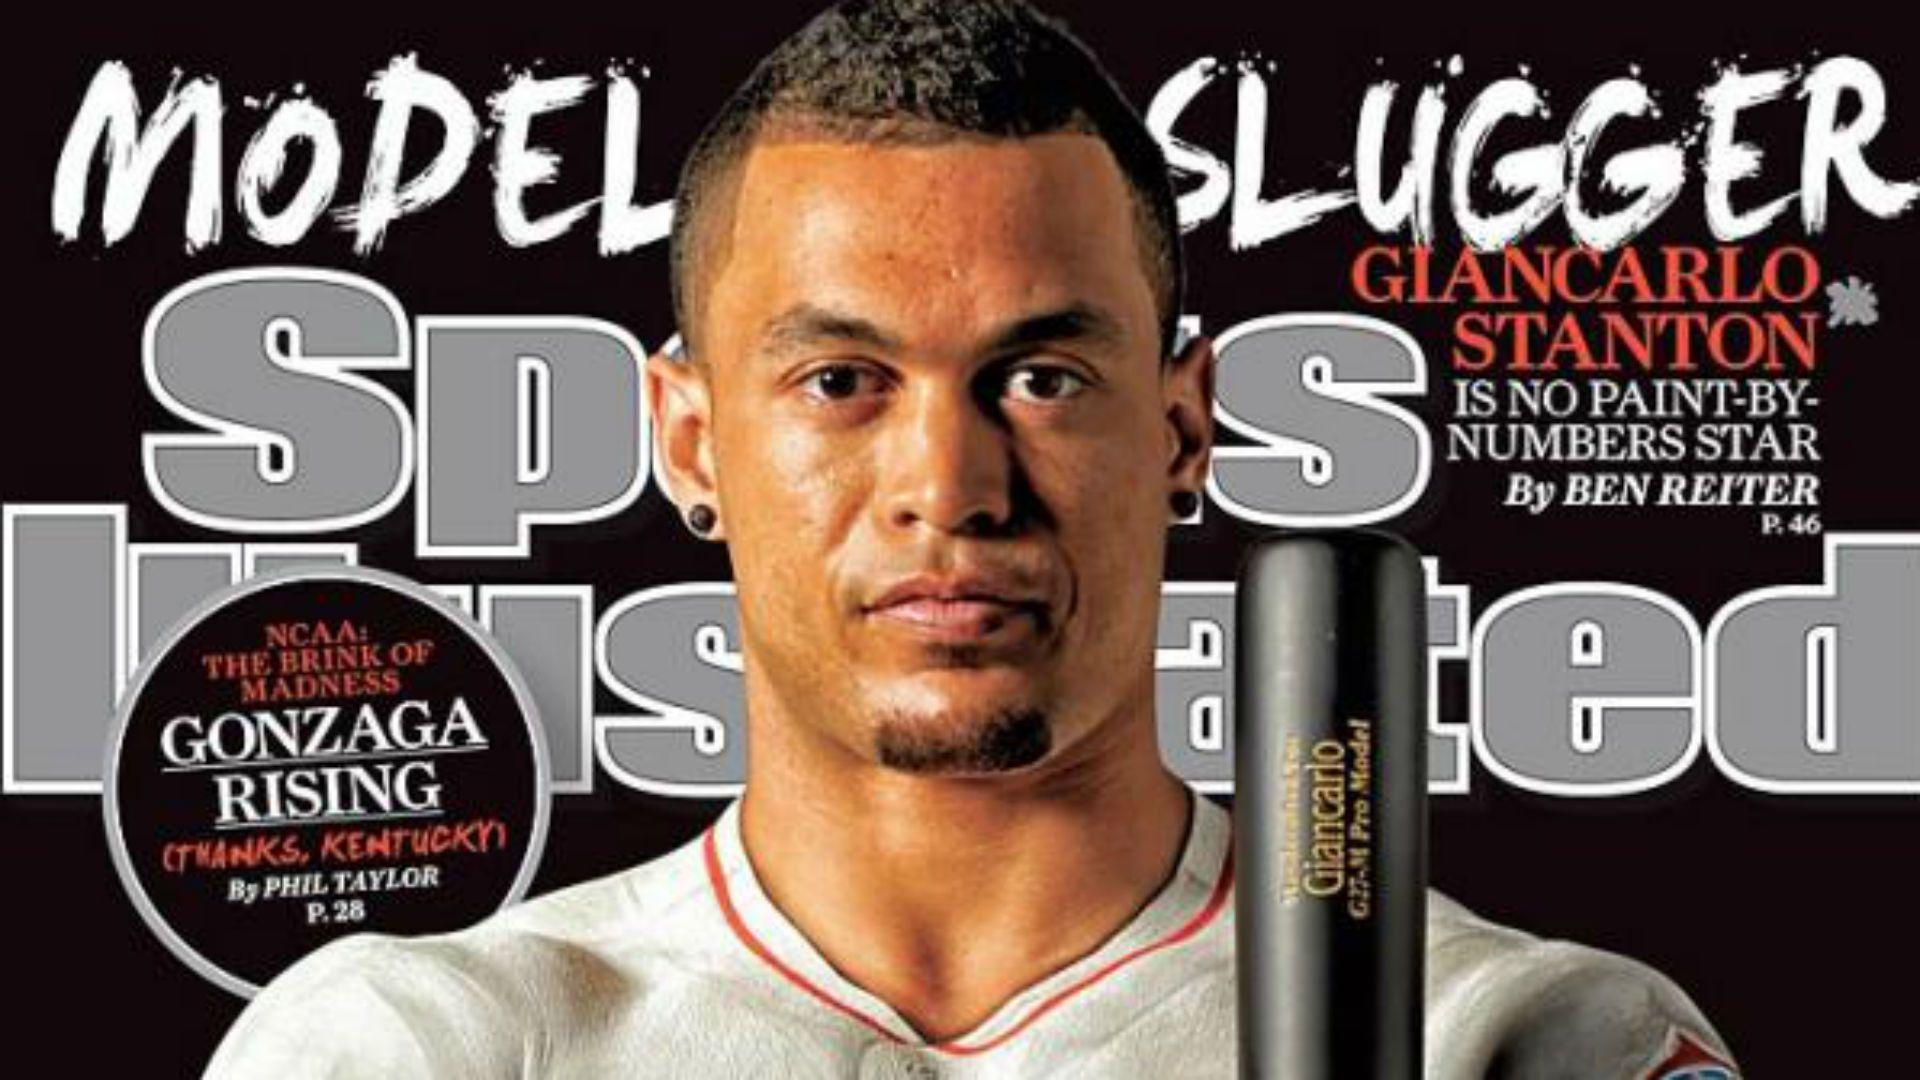 Giancarlo Stanton graces 'SI' cover wearing body paint. MLB